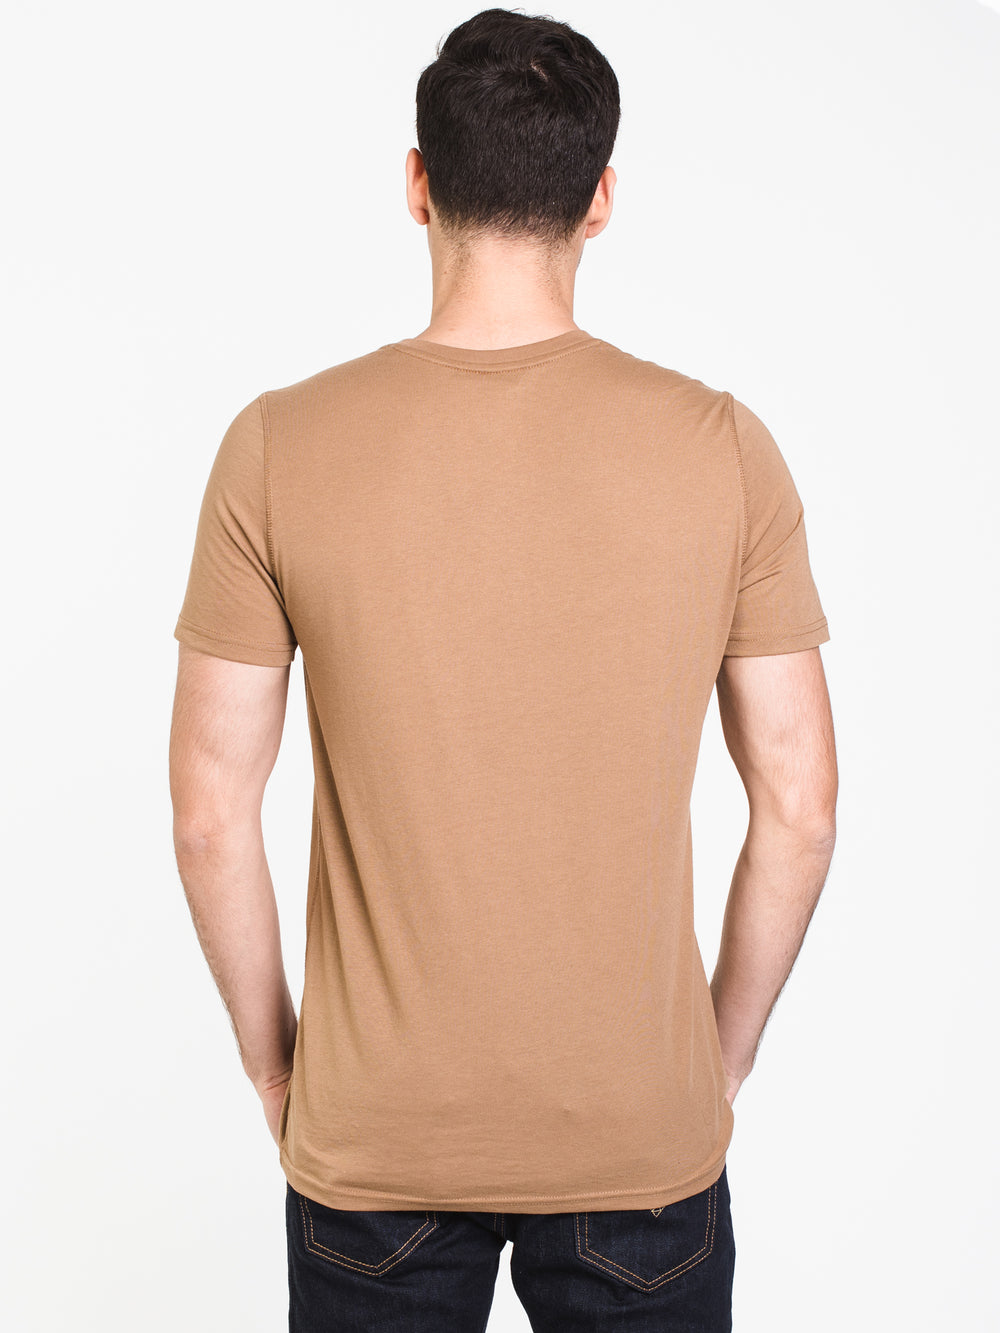 MENS VICTOR VNECK T - FLAX - CLEARANCE